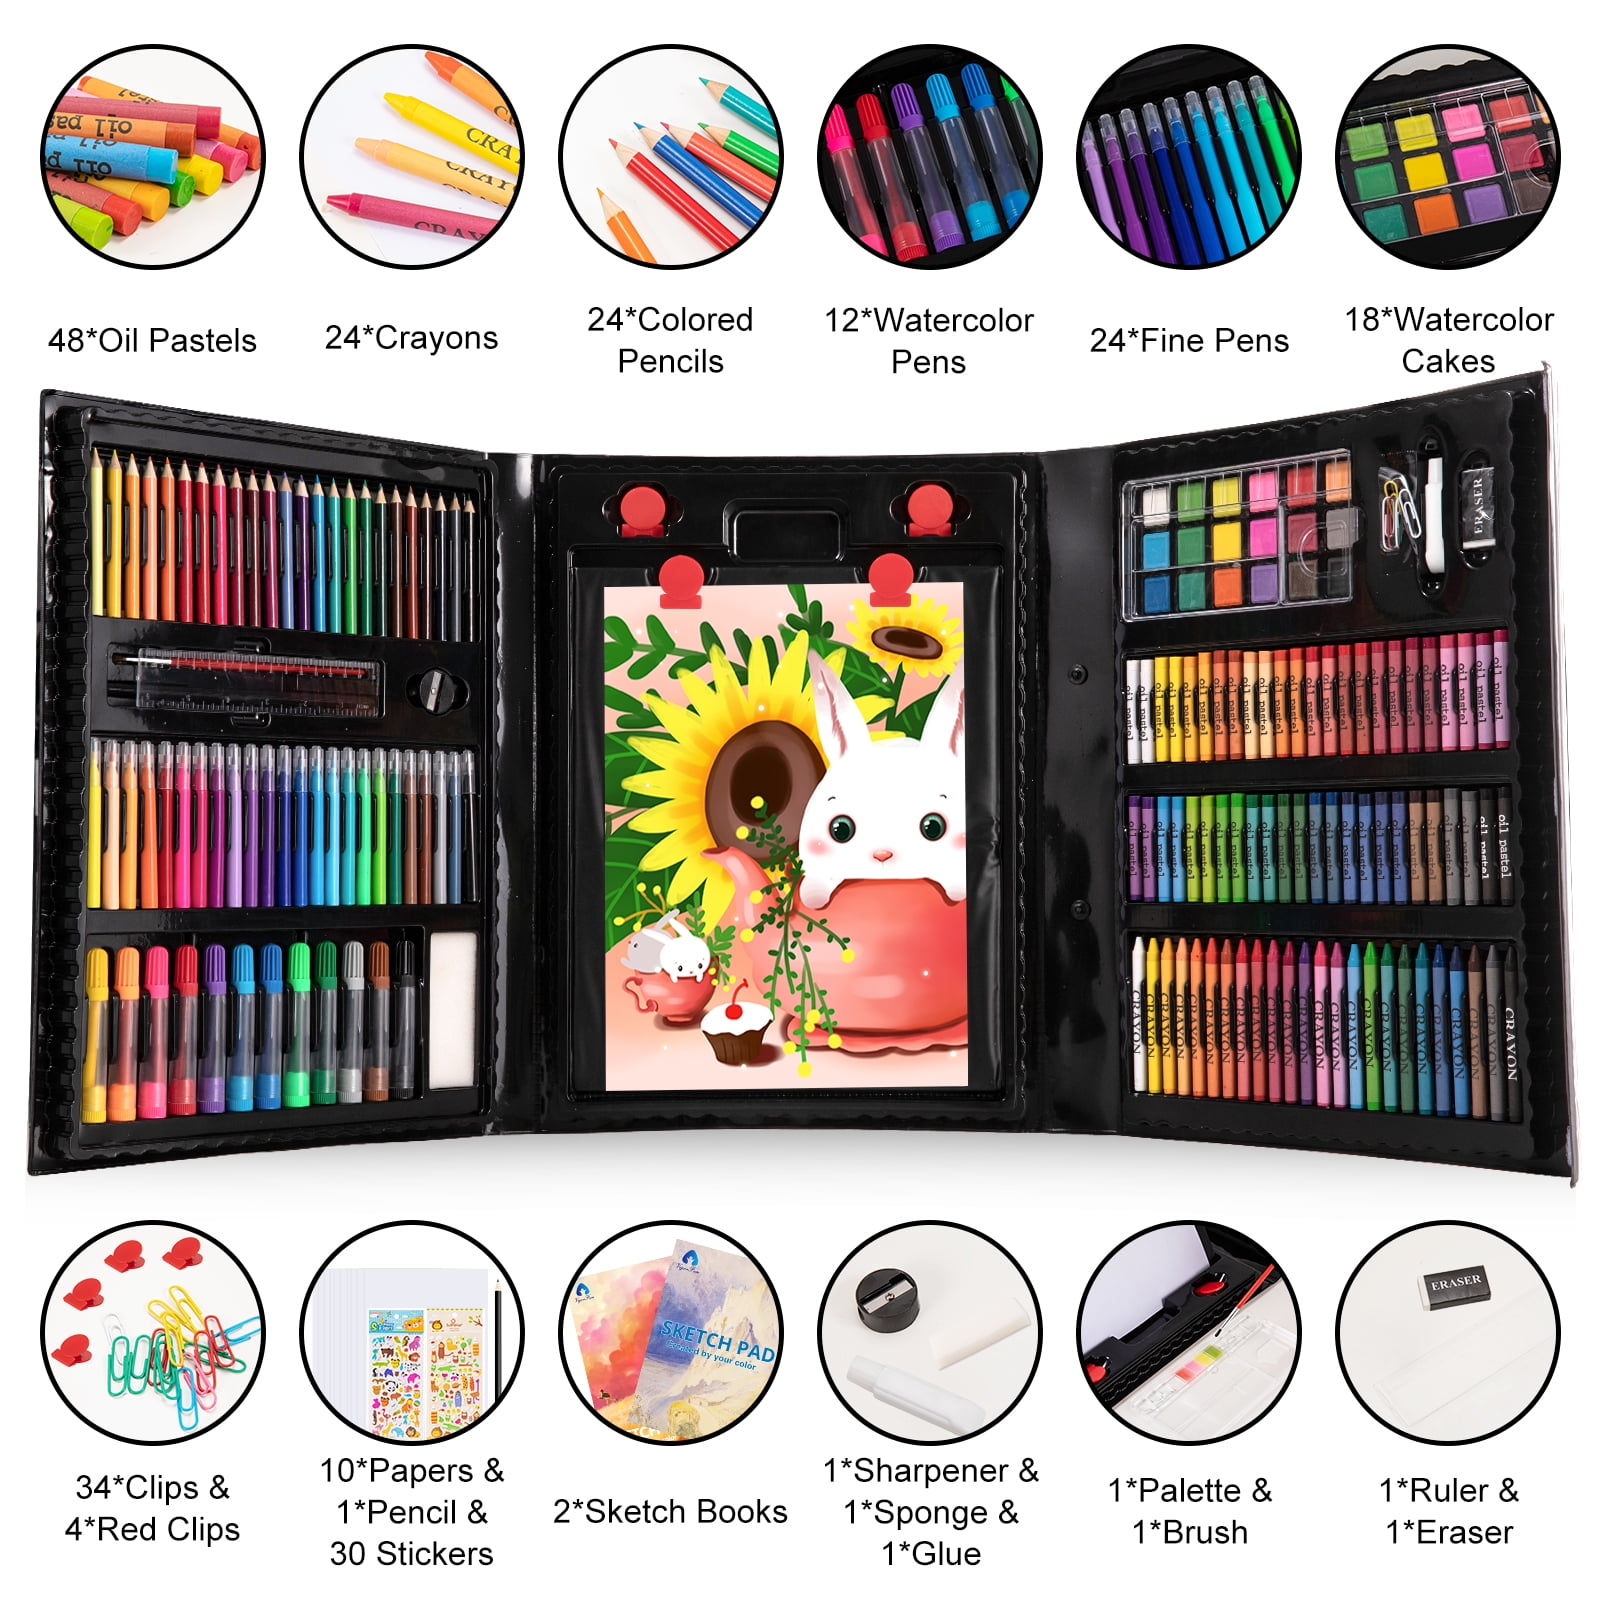 Premium Quality Sketch to Shade Art Supplies 37 Pcs Art Set | Includes  Exclusive Drawing Tutorials Ready as Birthday Gifts, Holiday Gifts, Artist